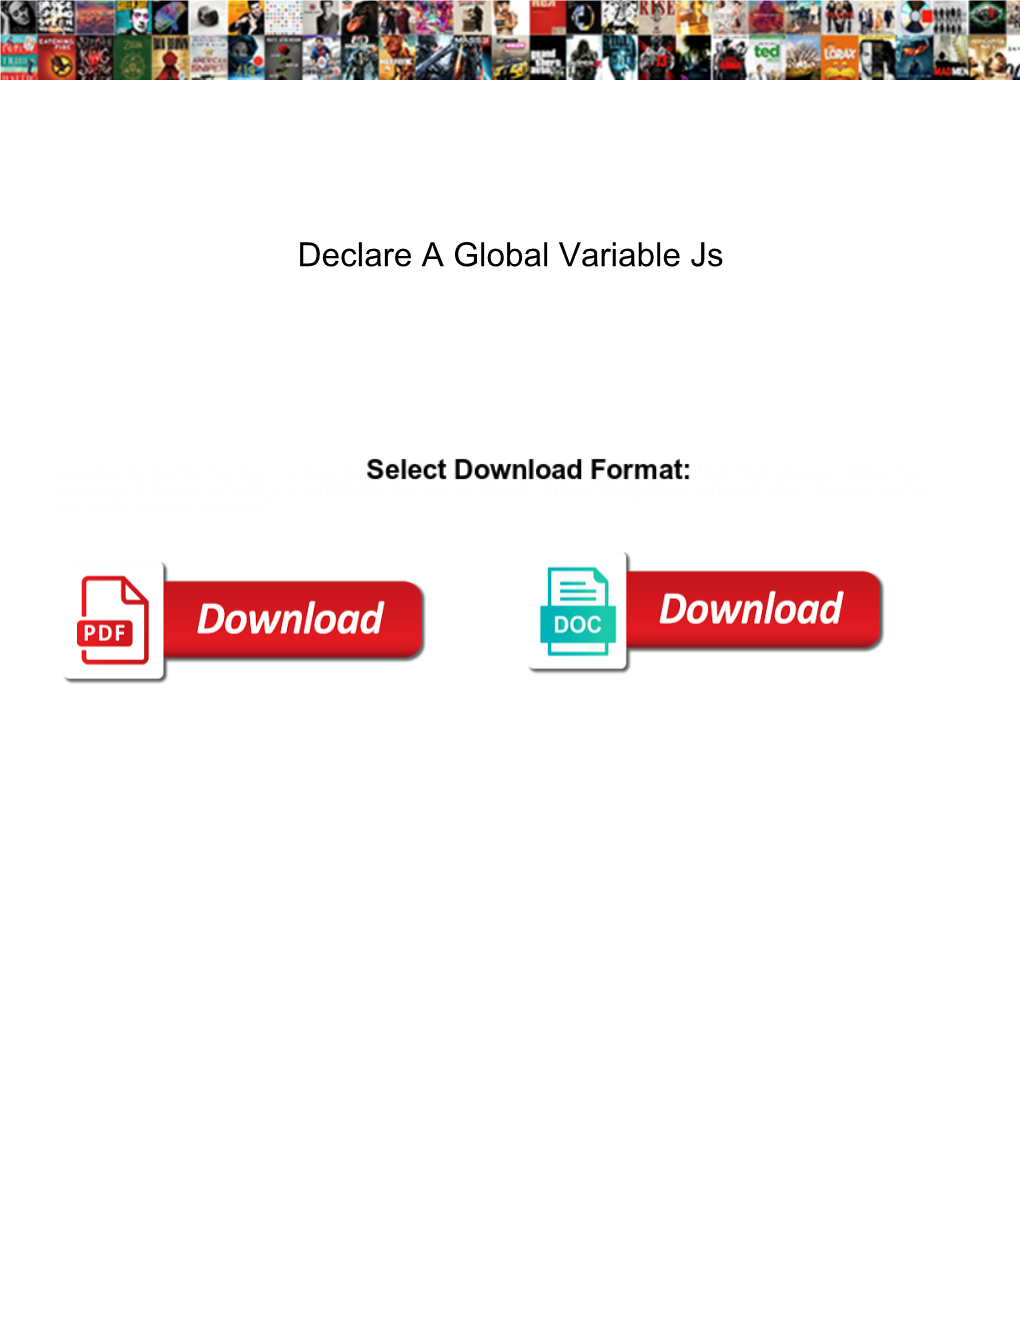 Declare a Global Variable Js